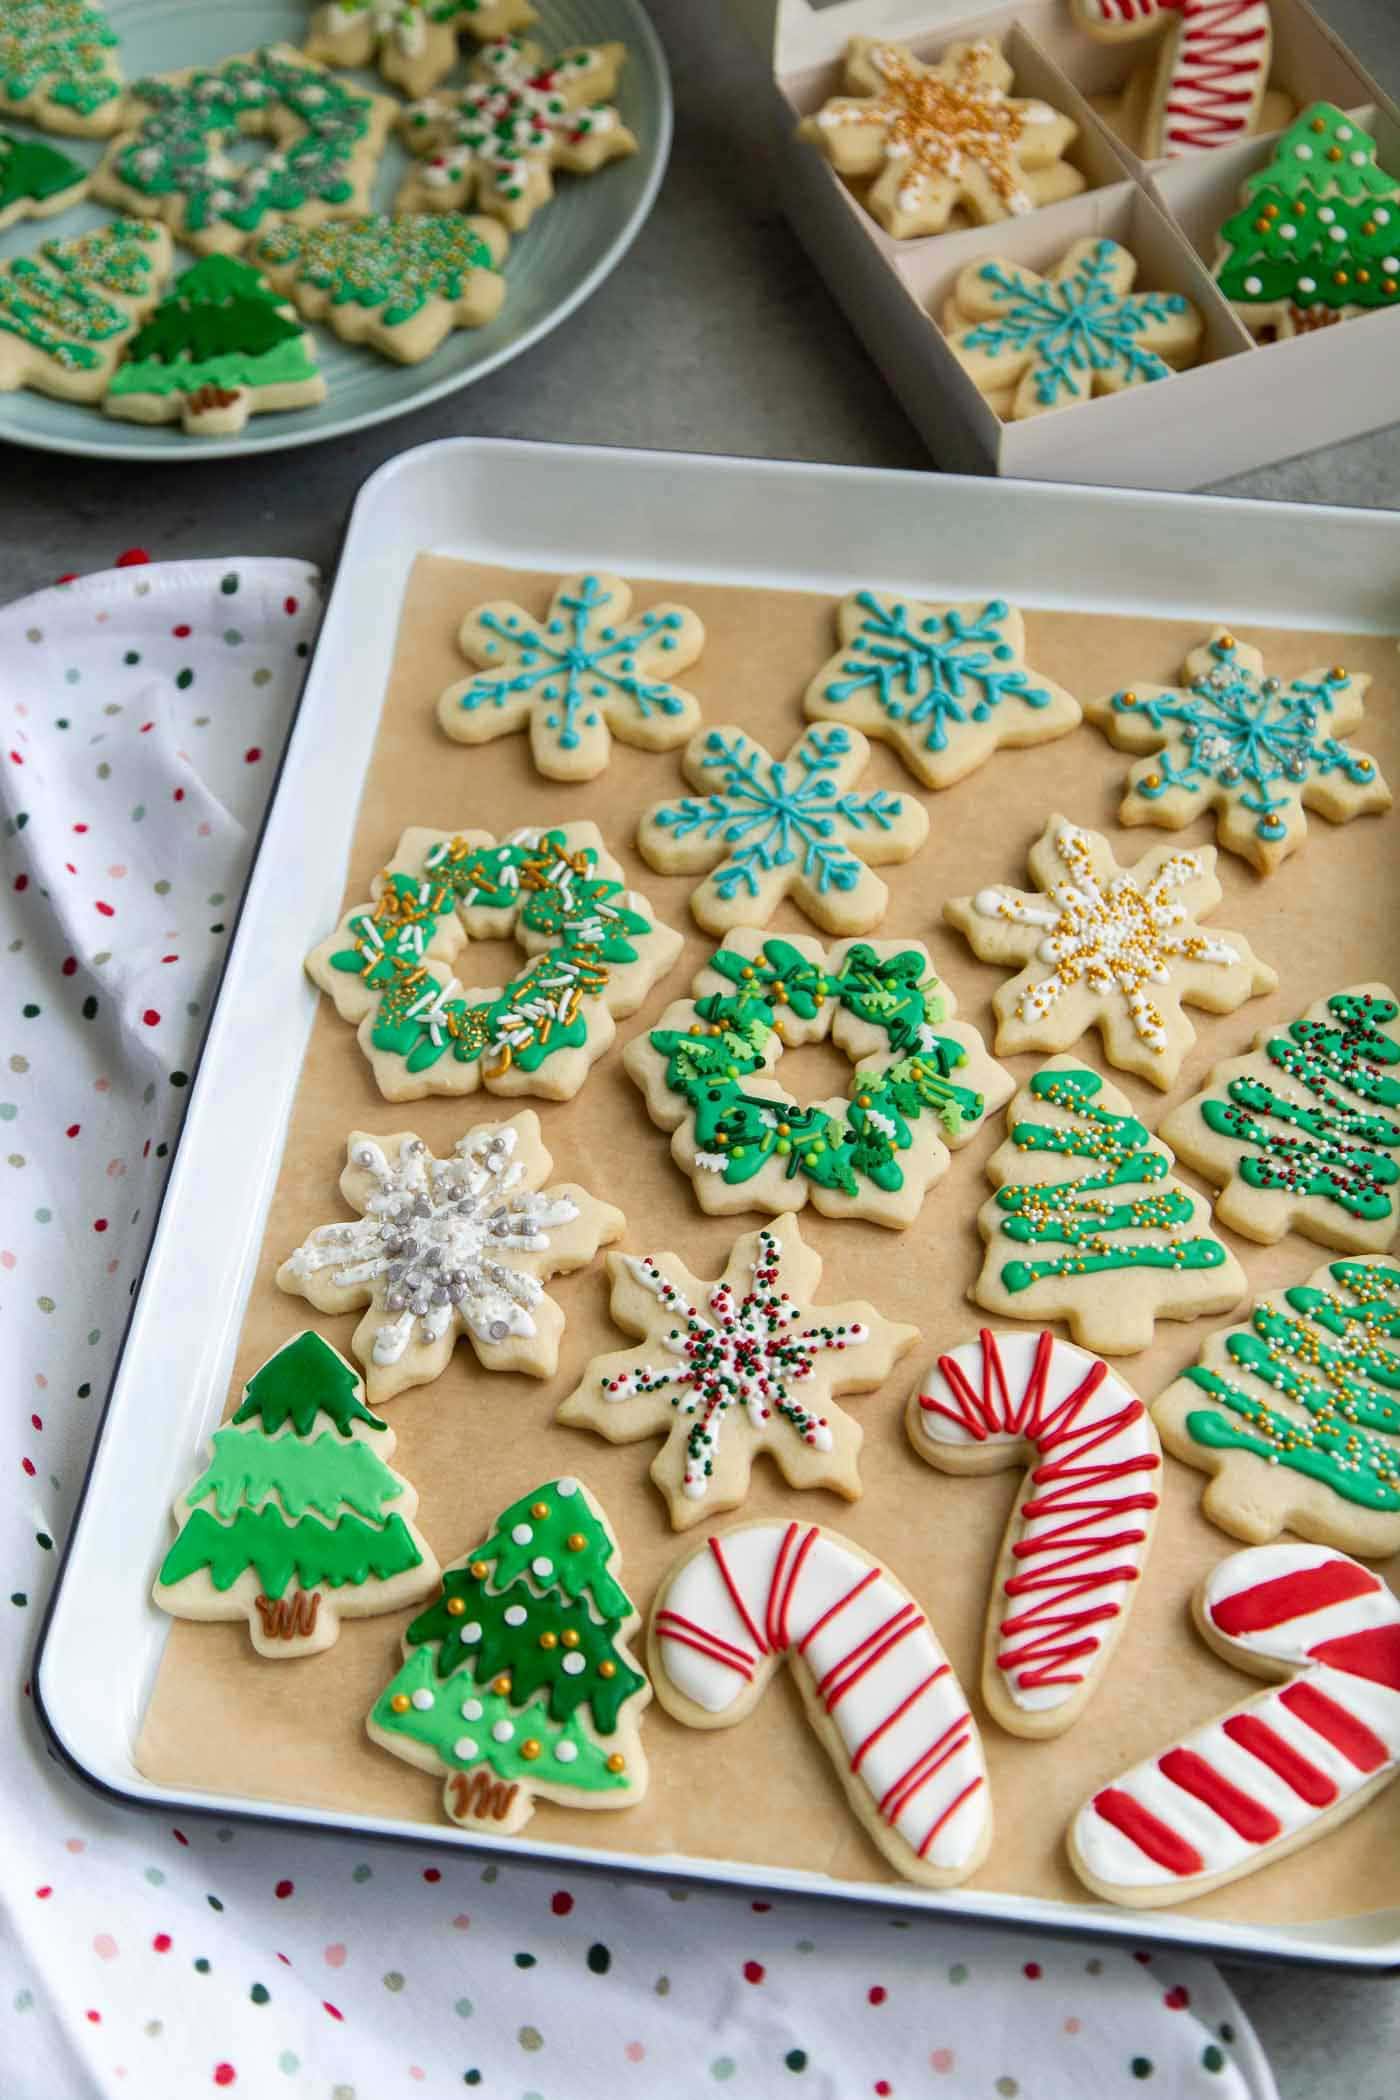 Fancy Sugar Sprinkle Mixes to decorate Cookies, Cakes, Baked Goods